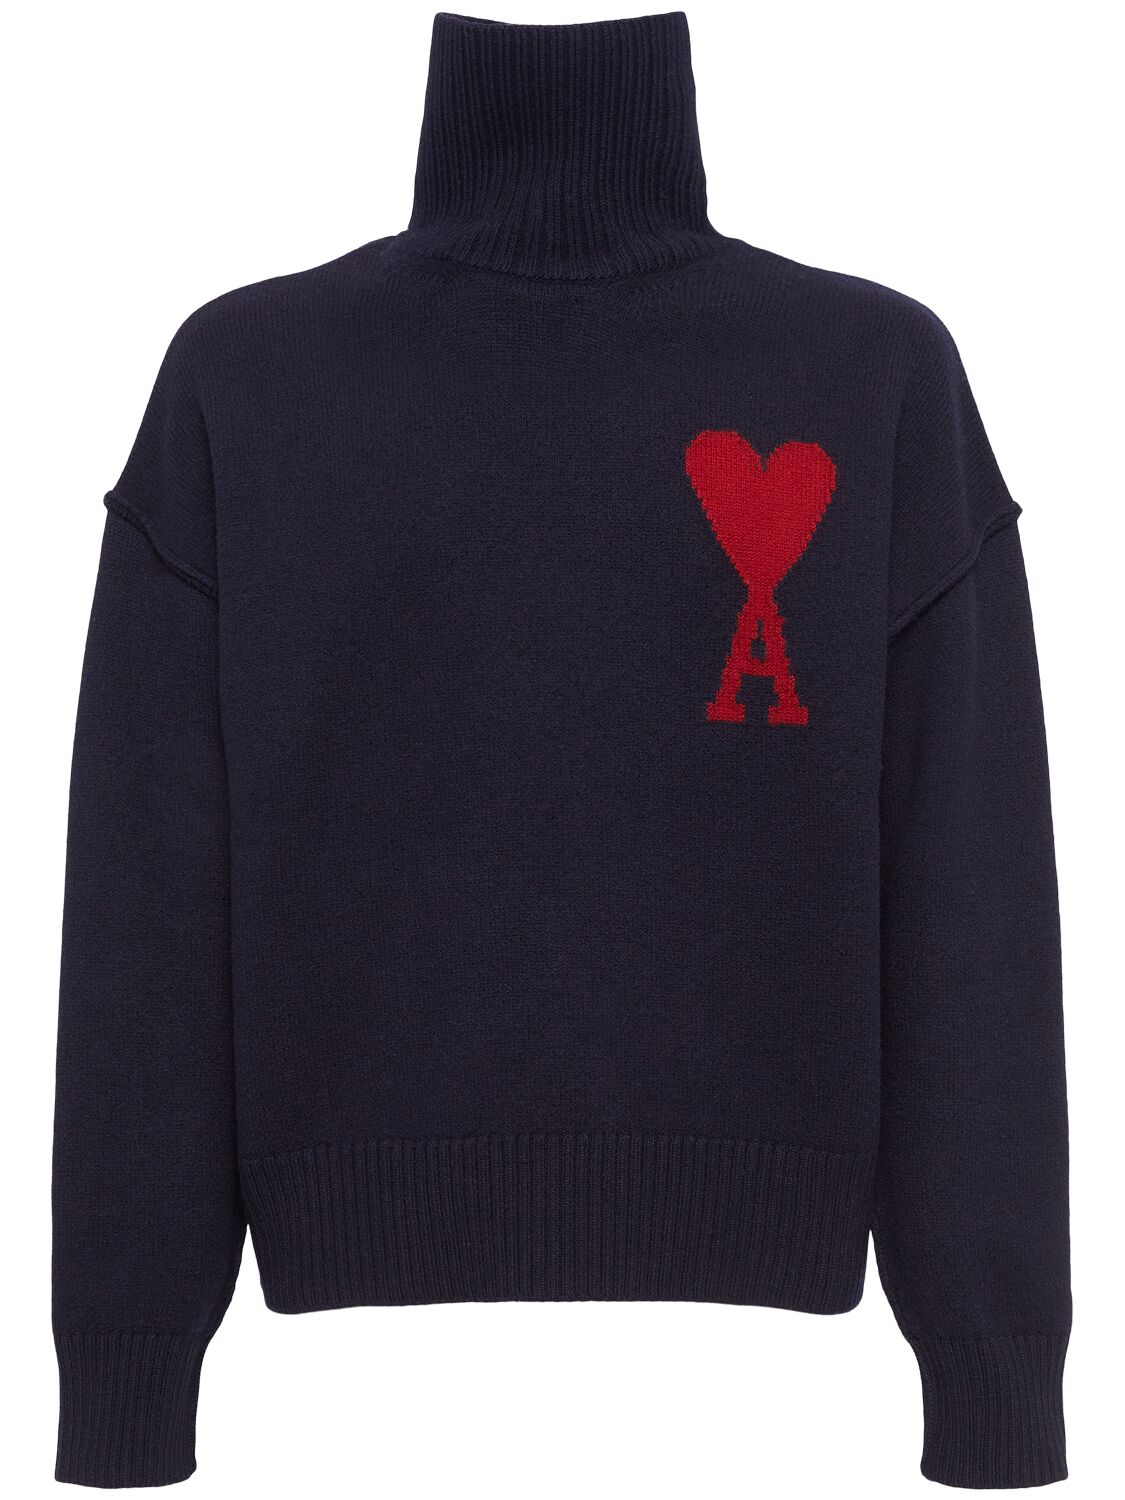 Ami Alexandre Mattiussi Adc Wool Sweater In Navy/red